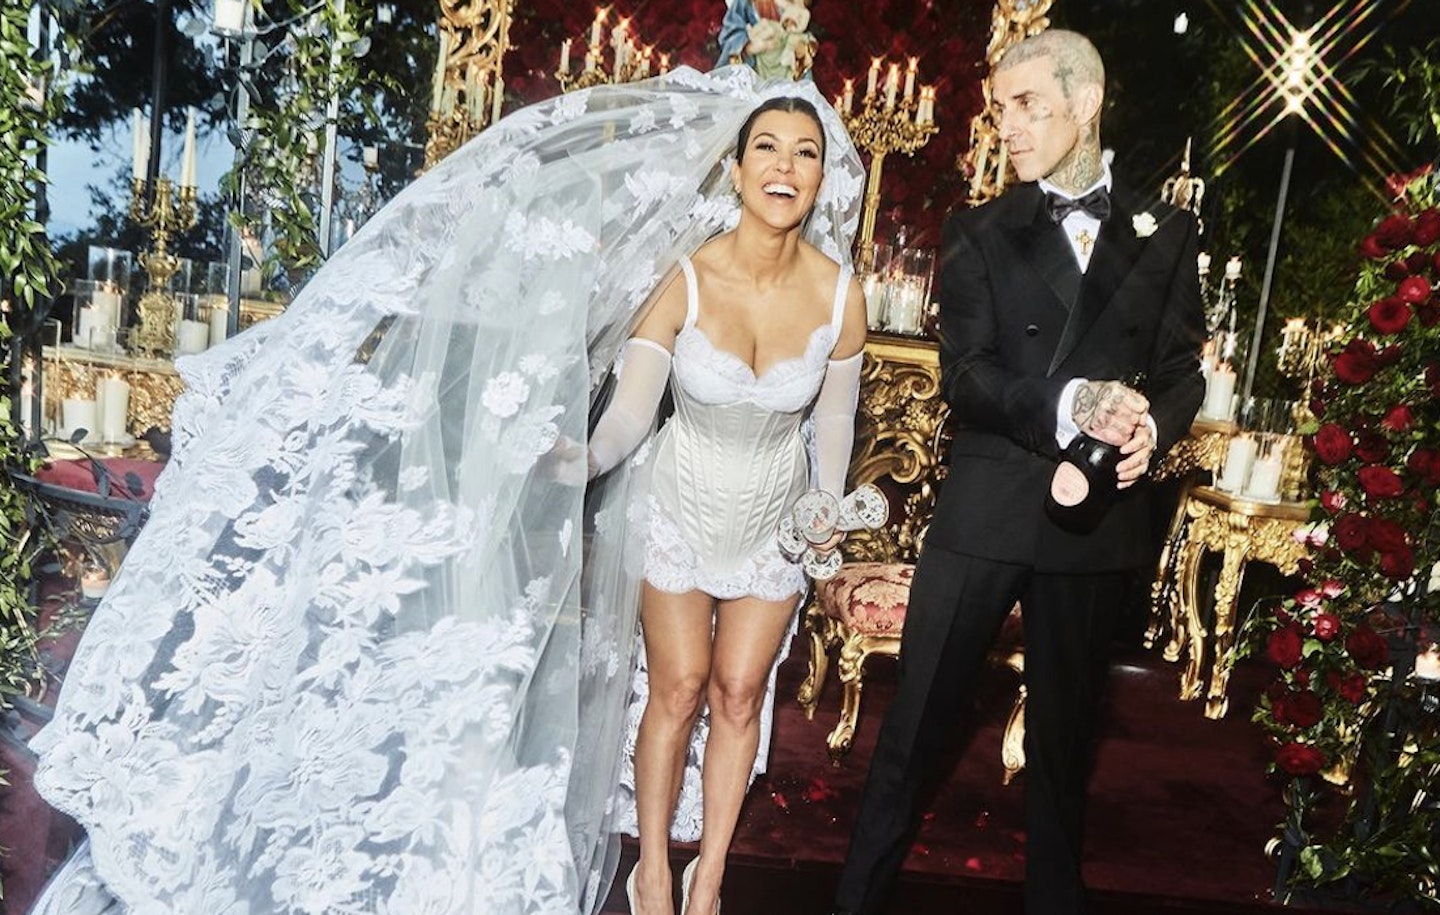 Guests at Paris Hilton's wedding look worse for wear as they leave